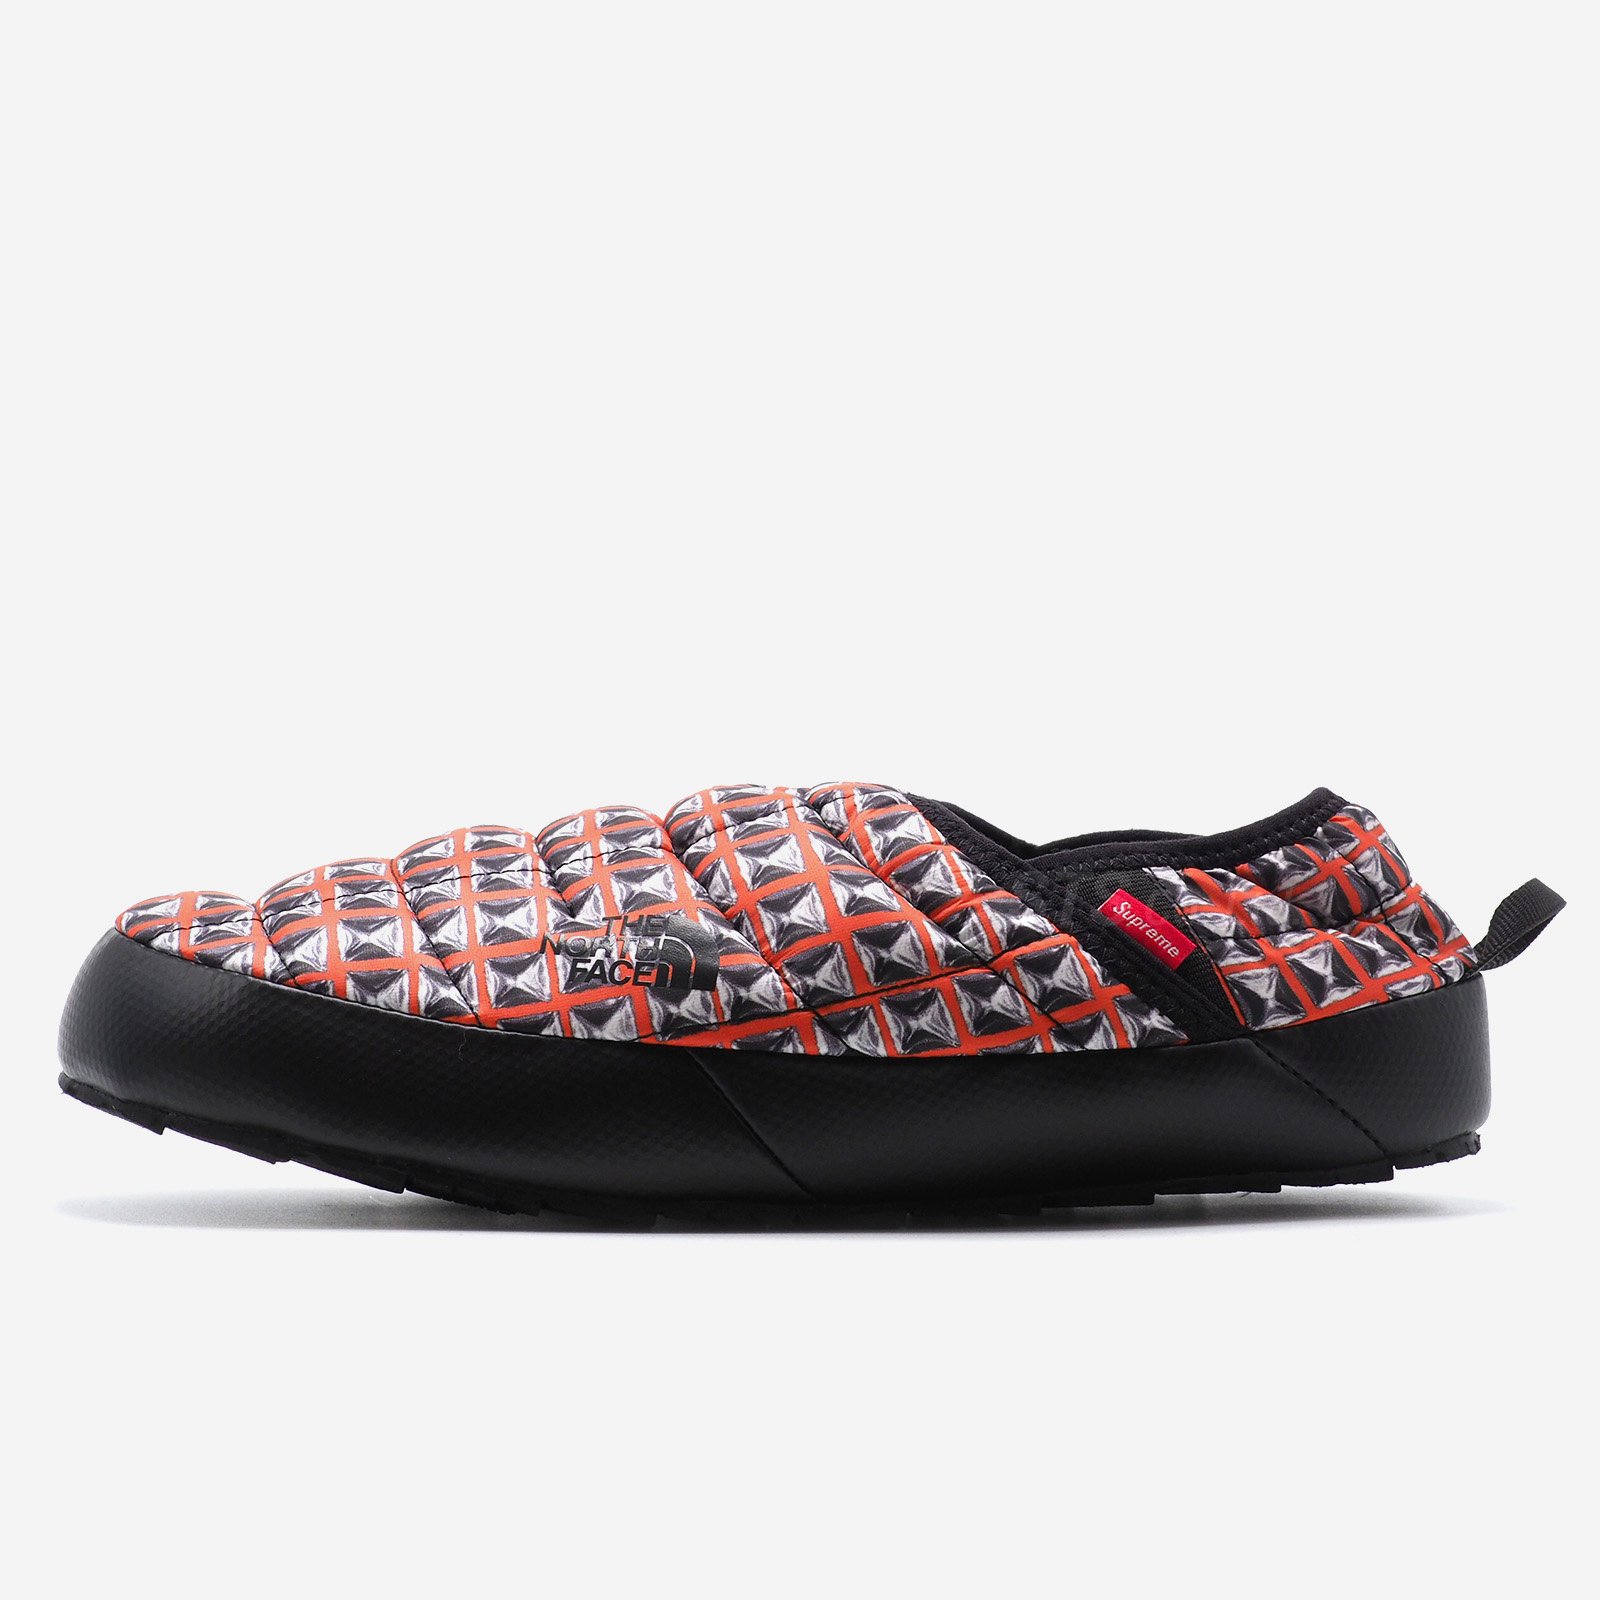 Supreme/The North Face Studded Traction Mule   UG.SHAFT